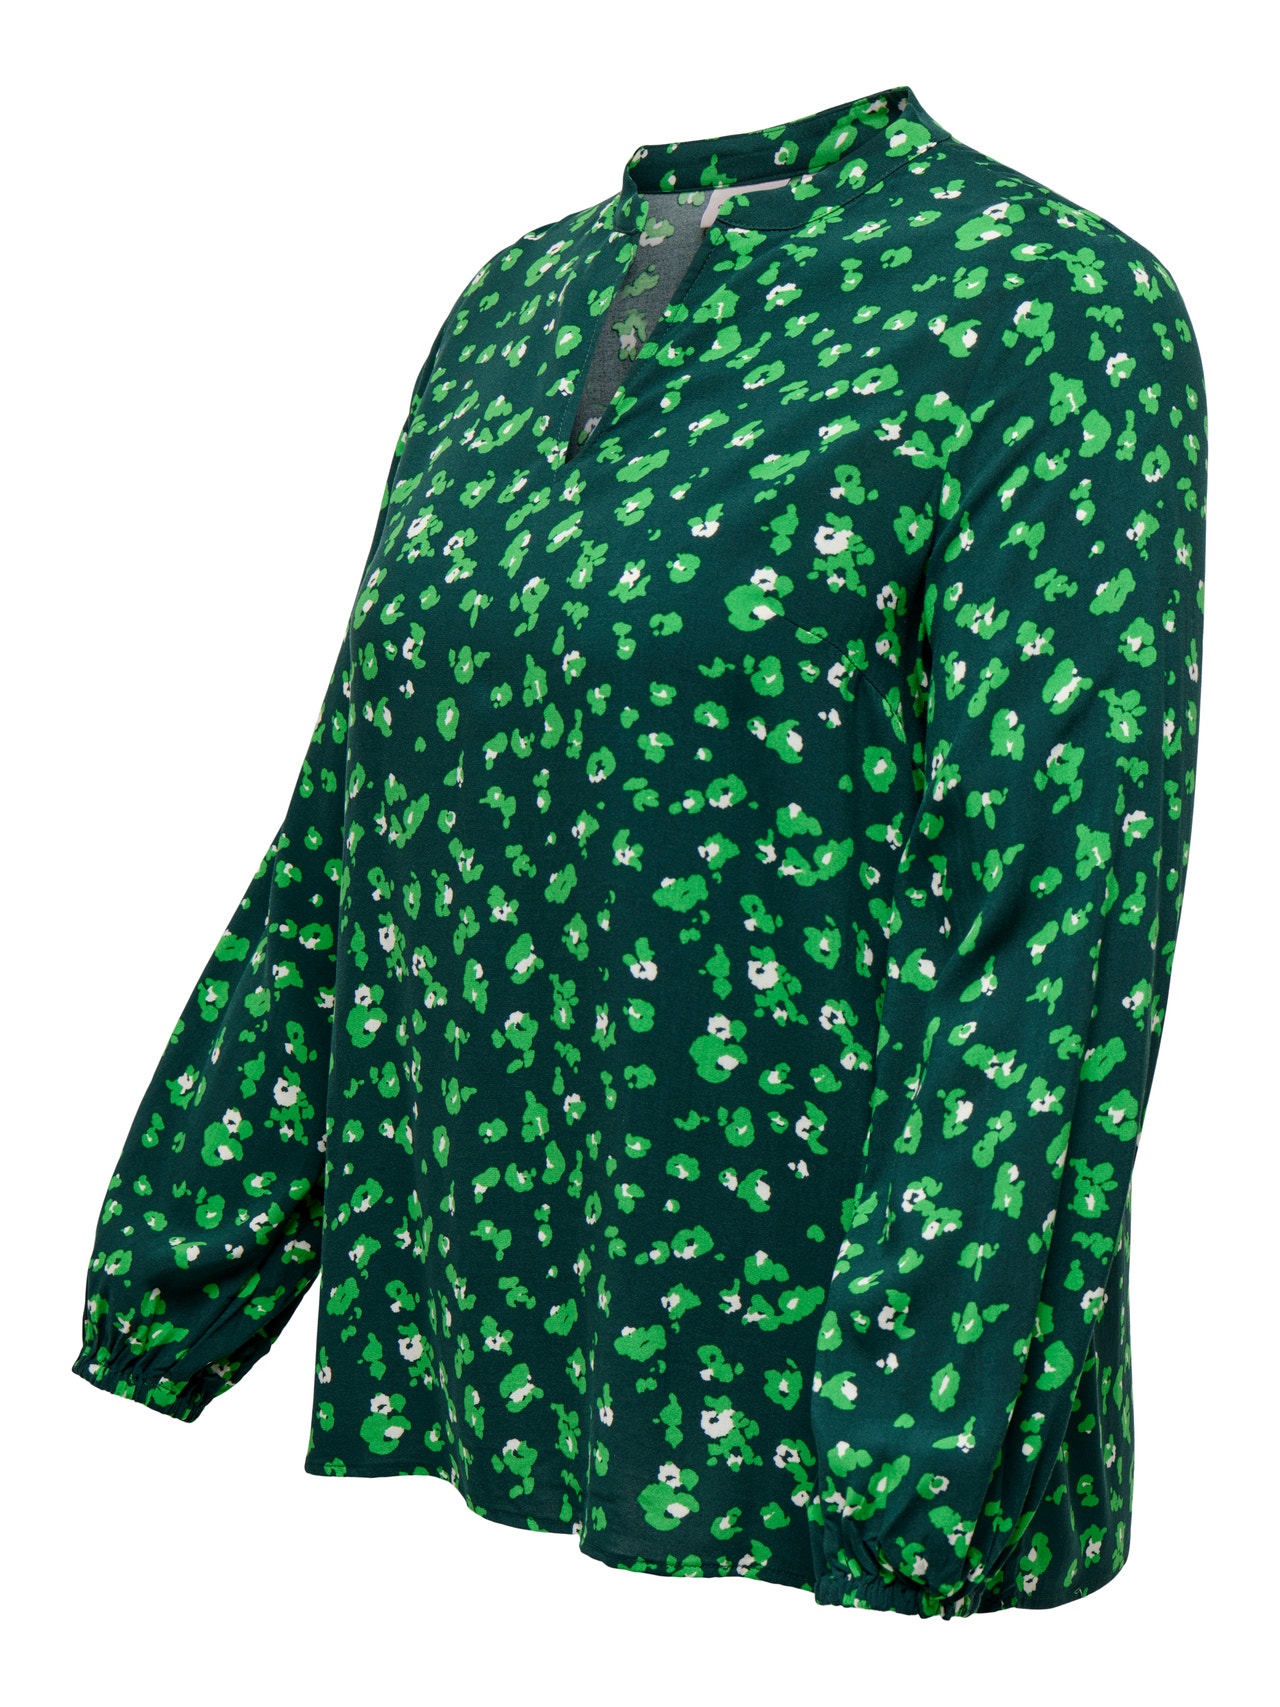 ONLY Curvy 3/4 sleeved Blouse -Pine Grove - 15270110